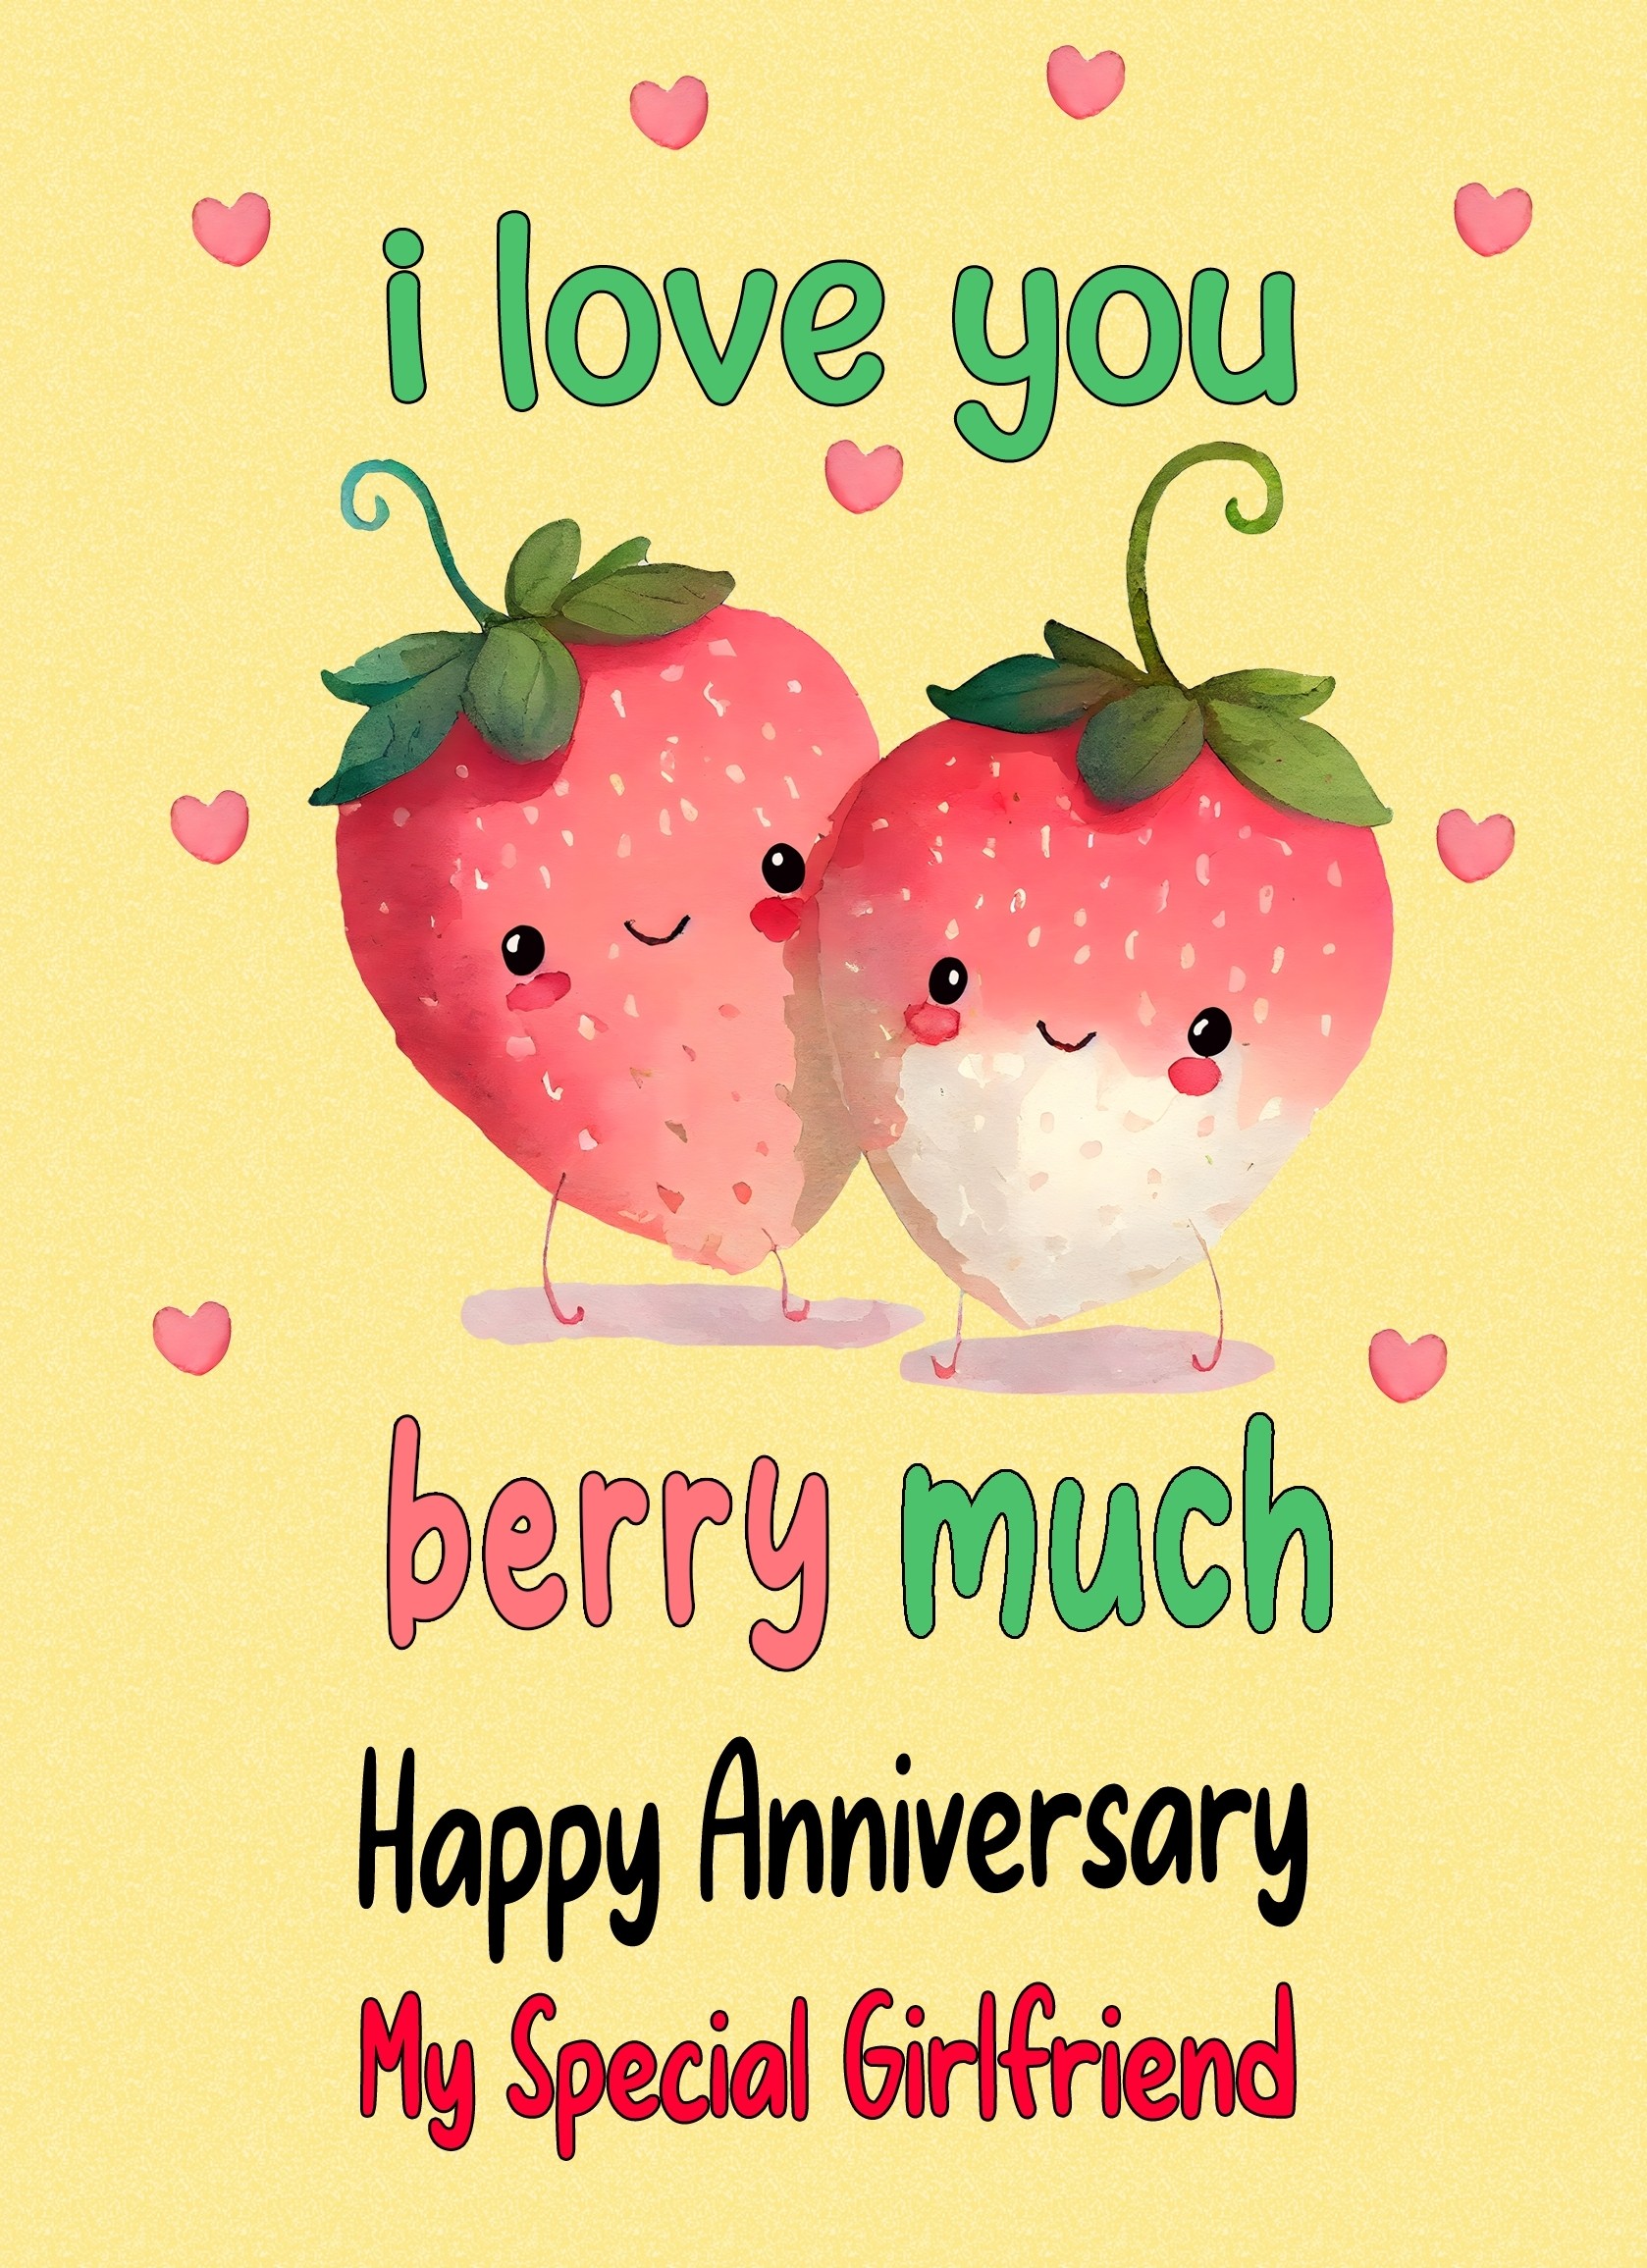 Funny Pun Romantic Anniversary Card for Girlfriend (Berry Much)